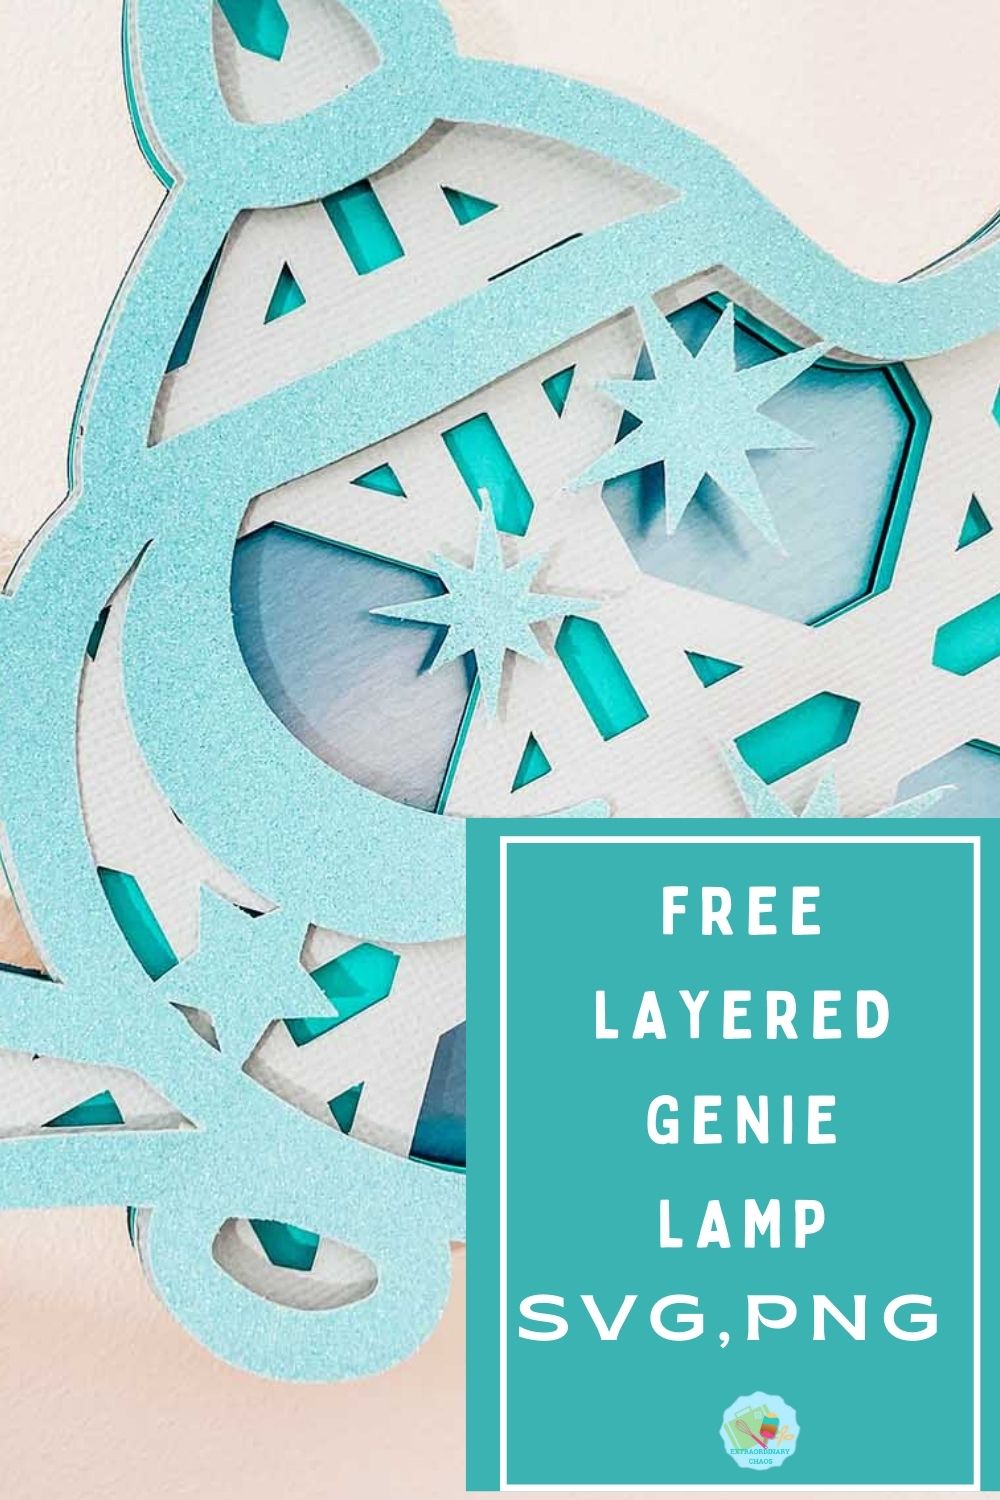 Free 3d layered genie lamp SVG and PNG for scrapbooking -2